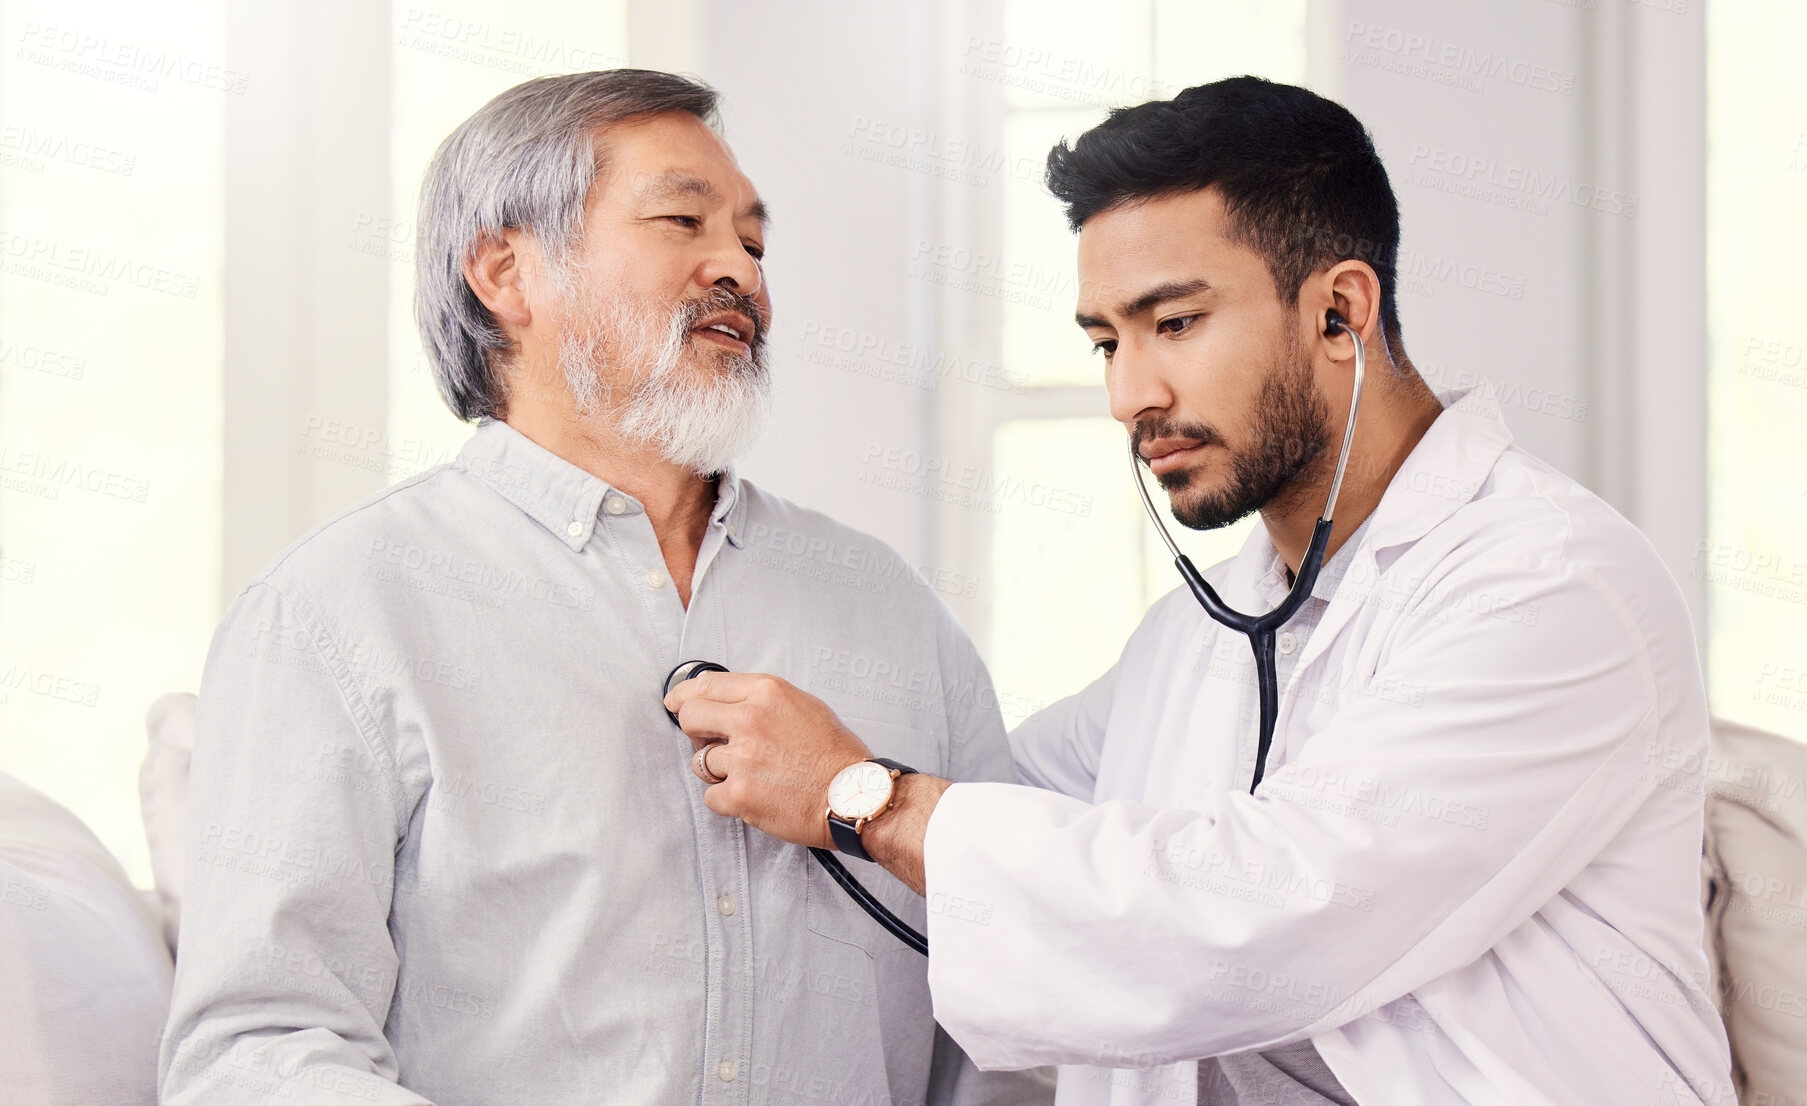 Buy stock photo Shot of a doctor listening to a senior man's heartbeat during a checkup